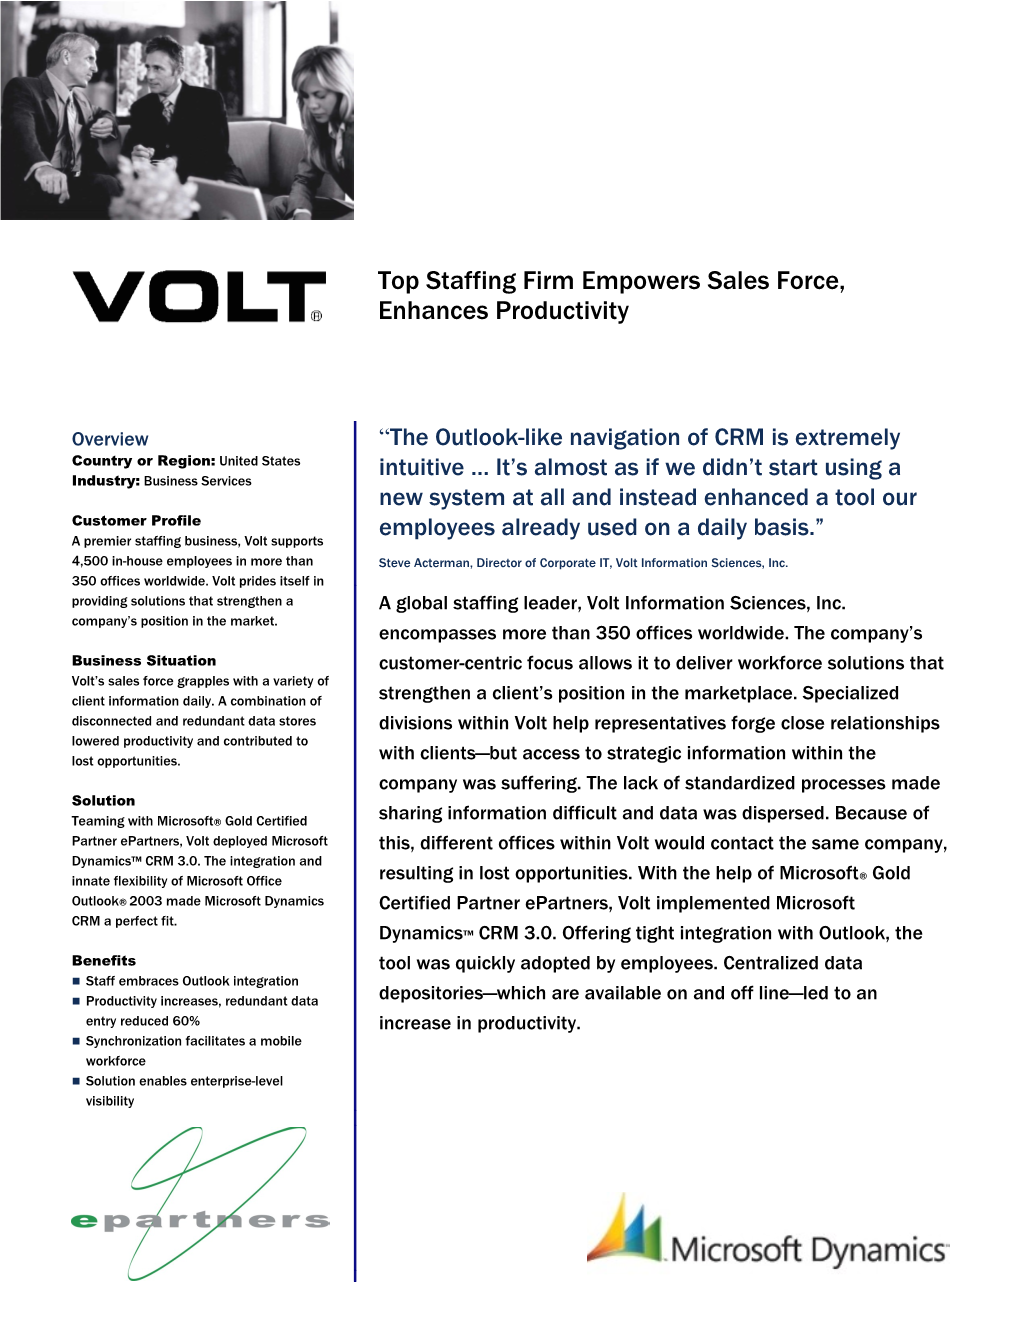 Largely Known for Its Unique Staffing Solutions, Volt Information Sciences, Inc. Is